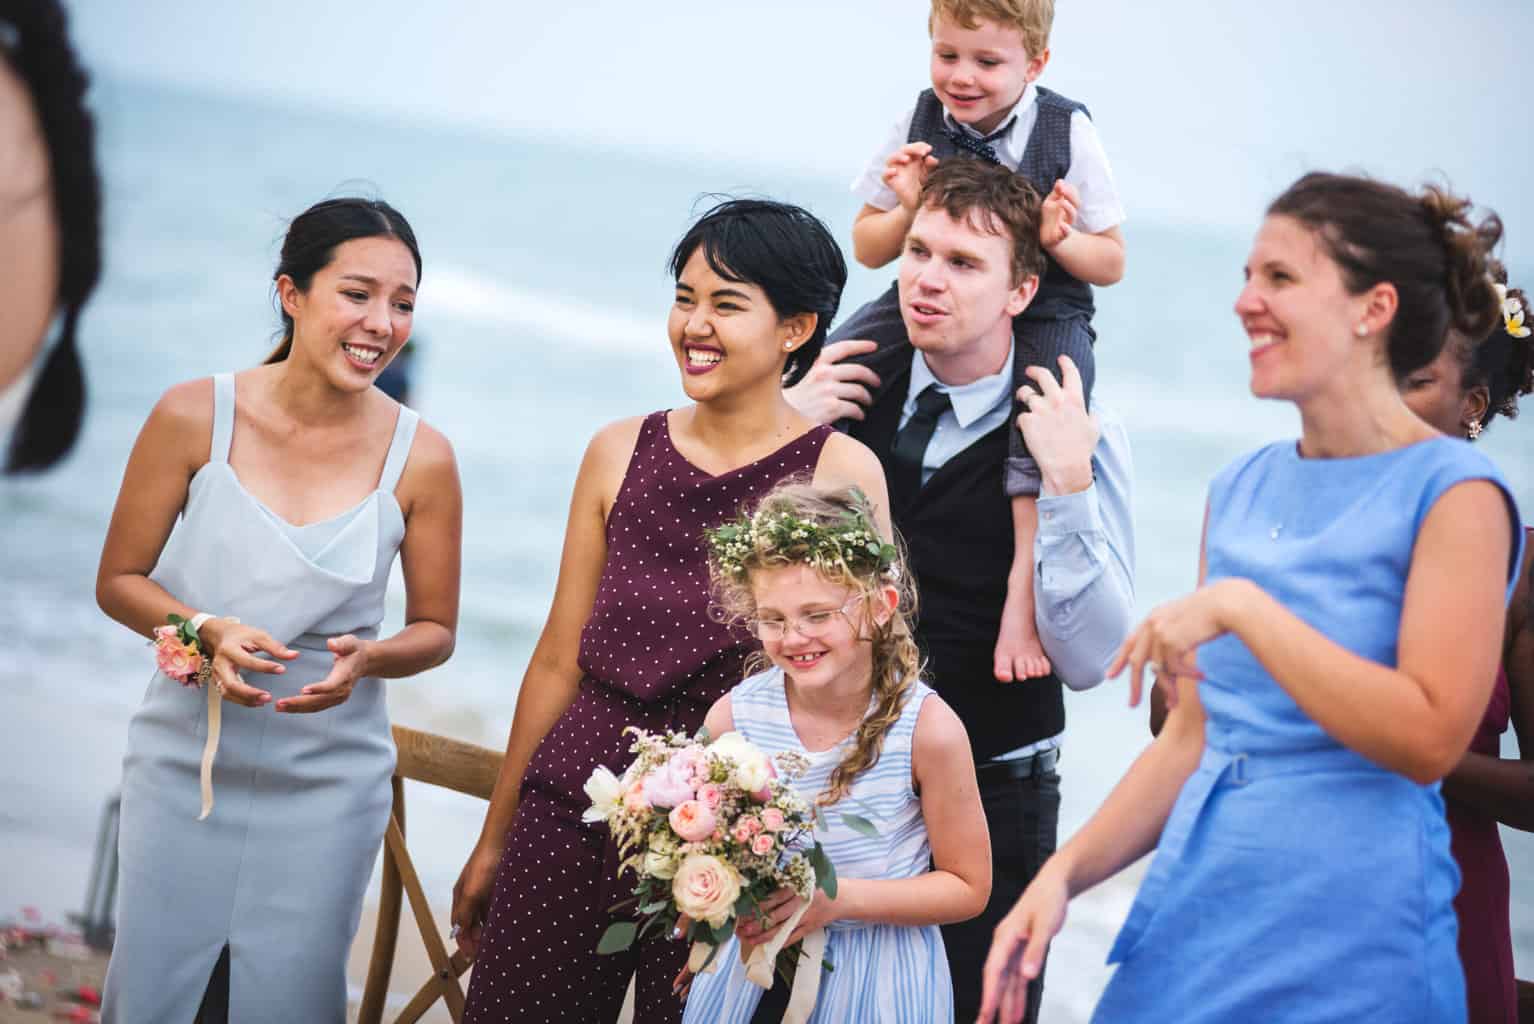 Guests laughing at funny wedding vows